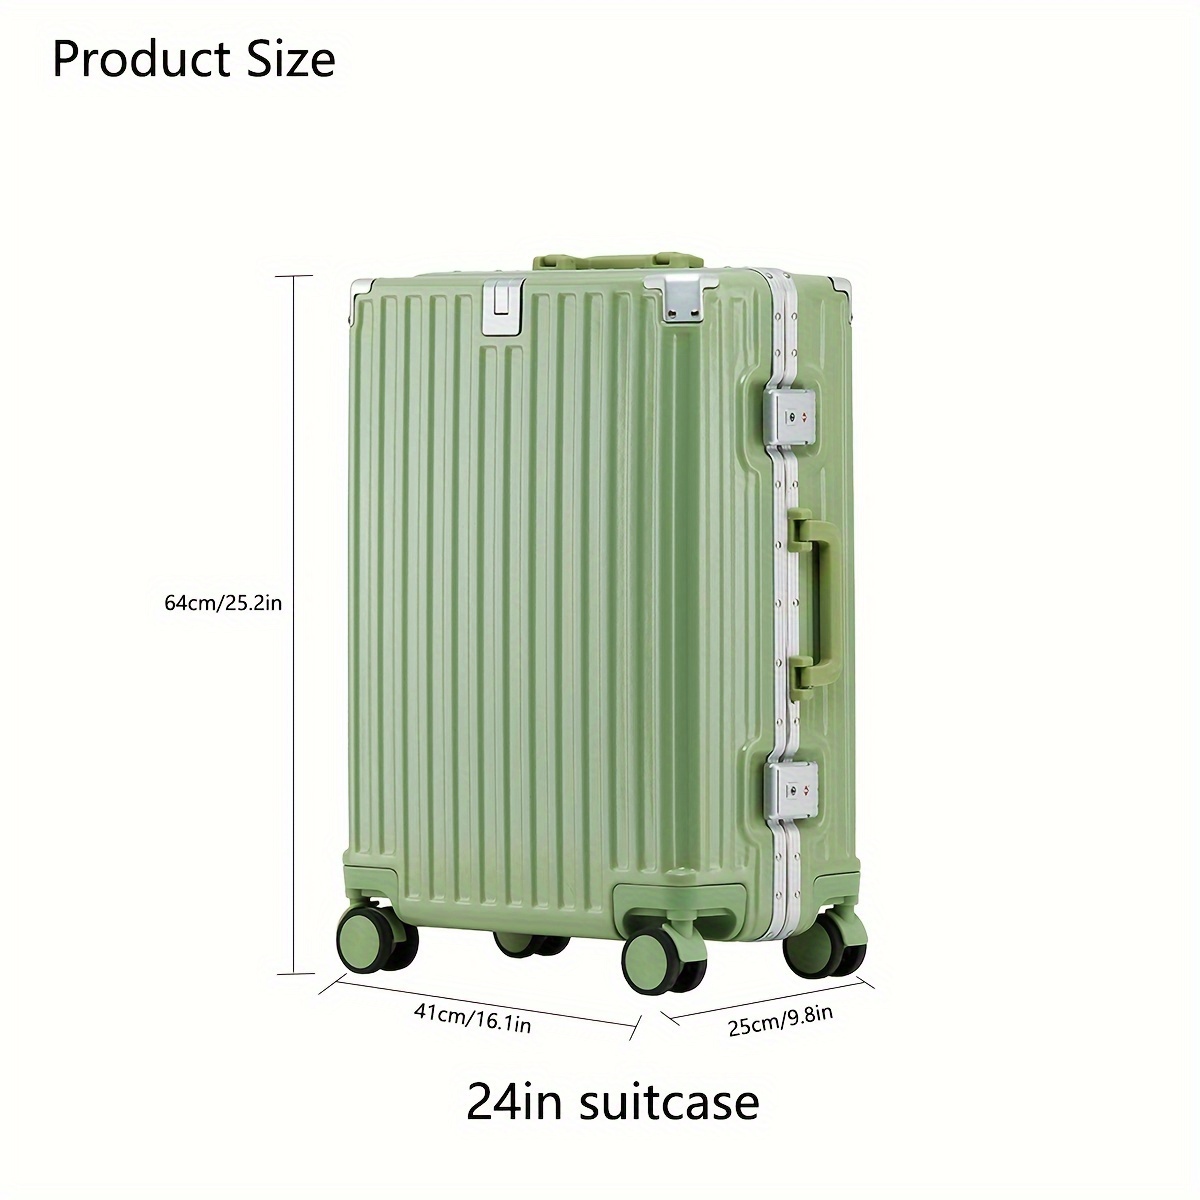 hard shell striped luggage suitcase trendy carry on lightweight trolley case universal universal wheel travel case